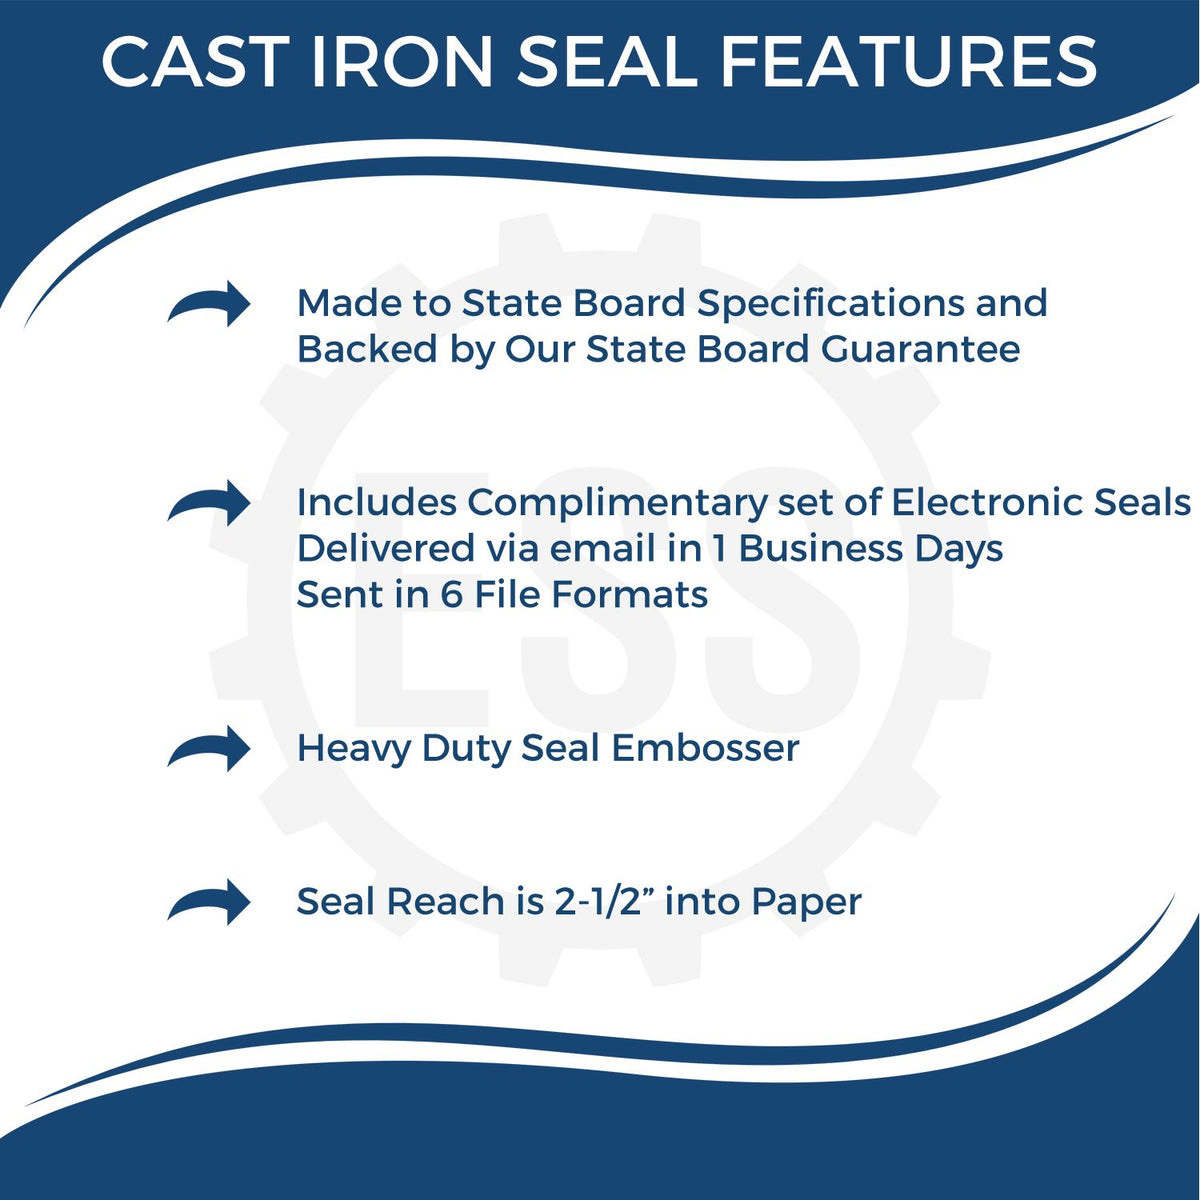 A picture of an infographic highlighting the selling points for the Heavy Duty Cast Iron Georgia Geologist Seal Embosser